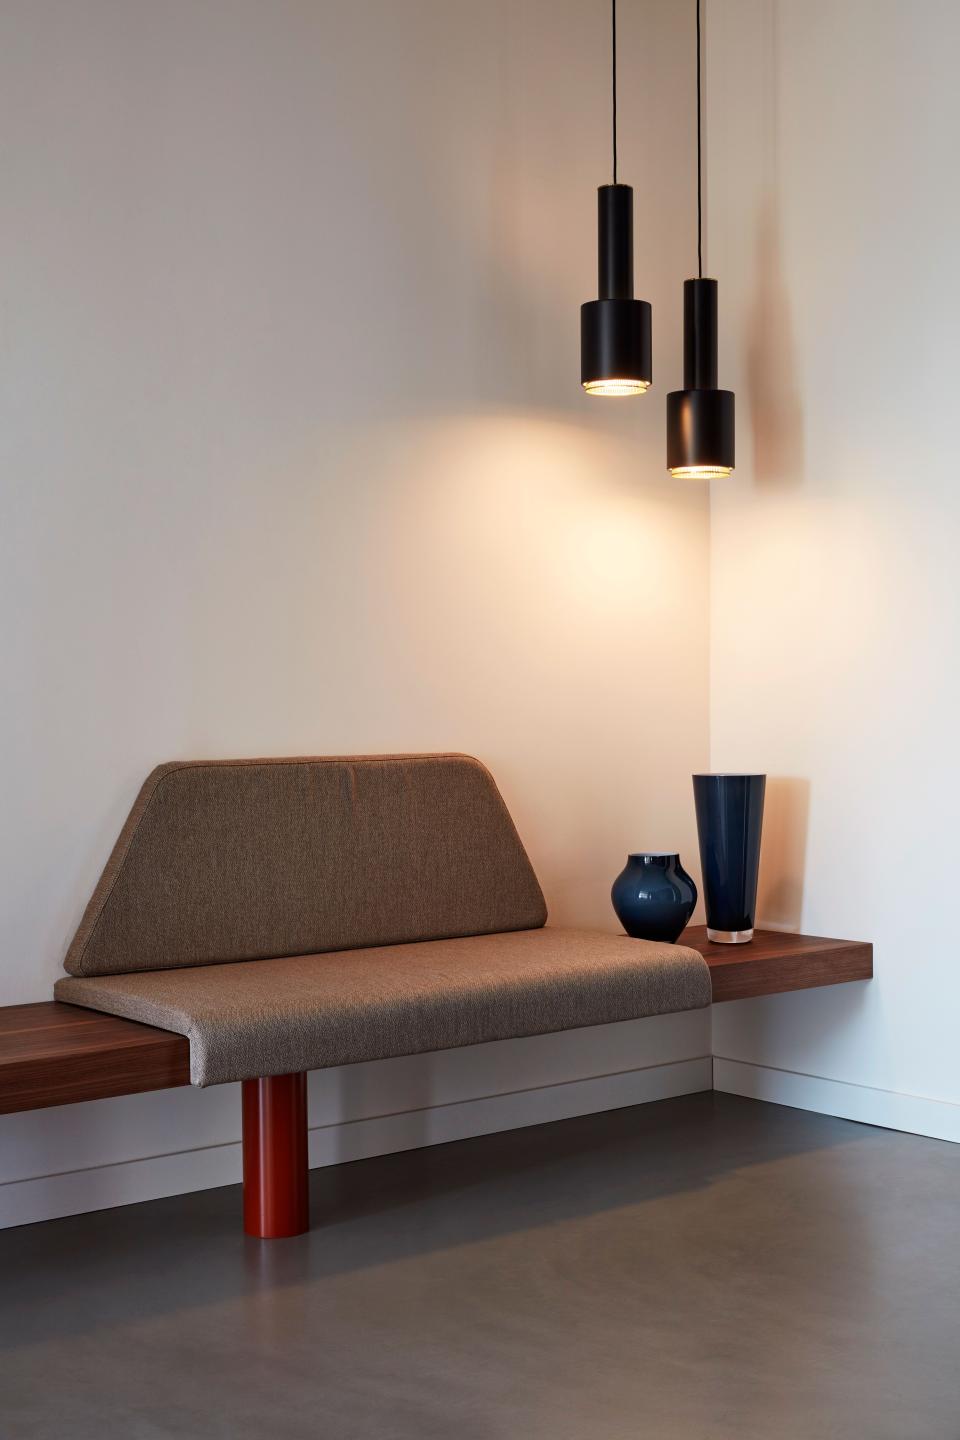 At the entrance, a cozy nook is furnished with a small bespoke bench and adorned with two pendants by Artek.